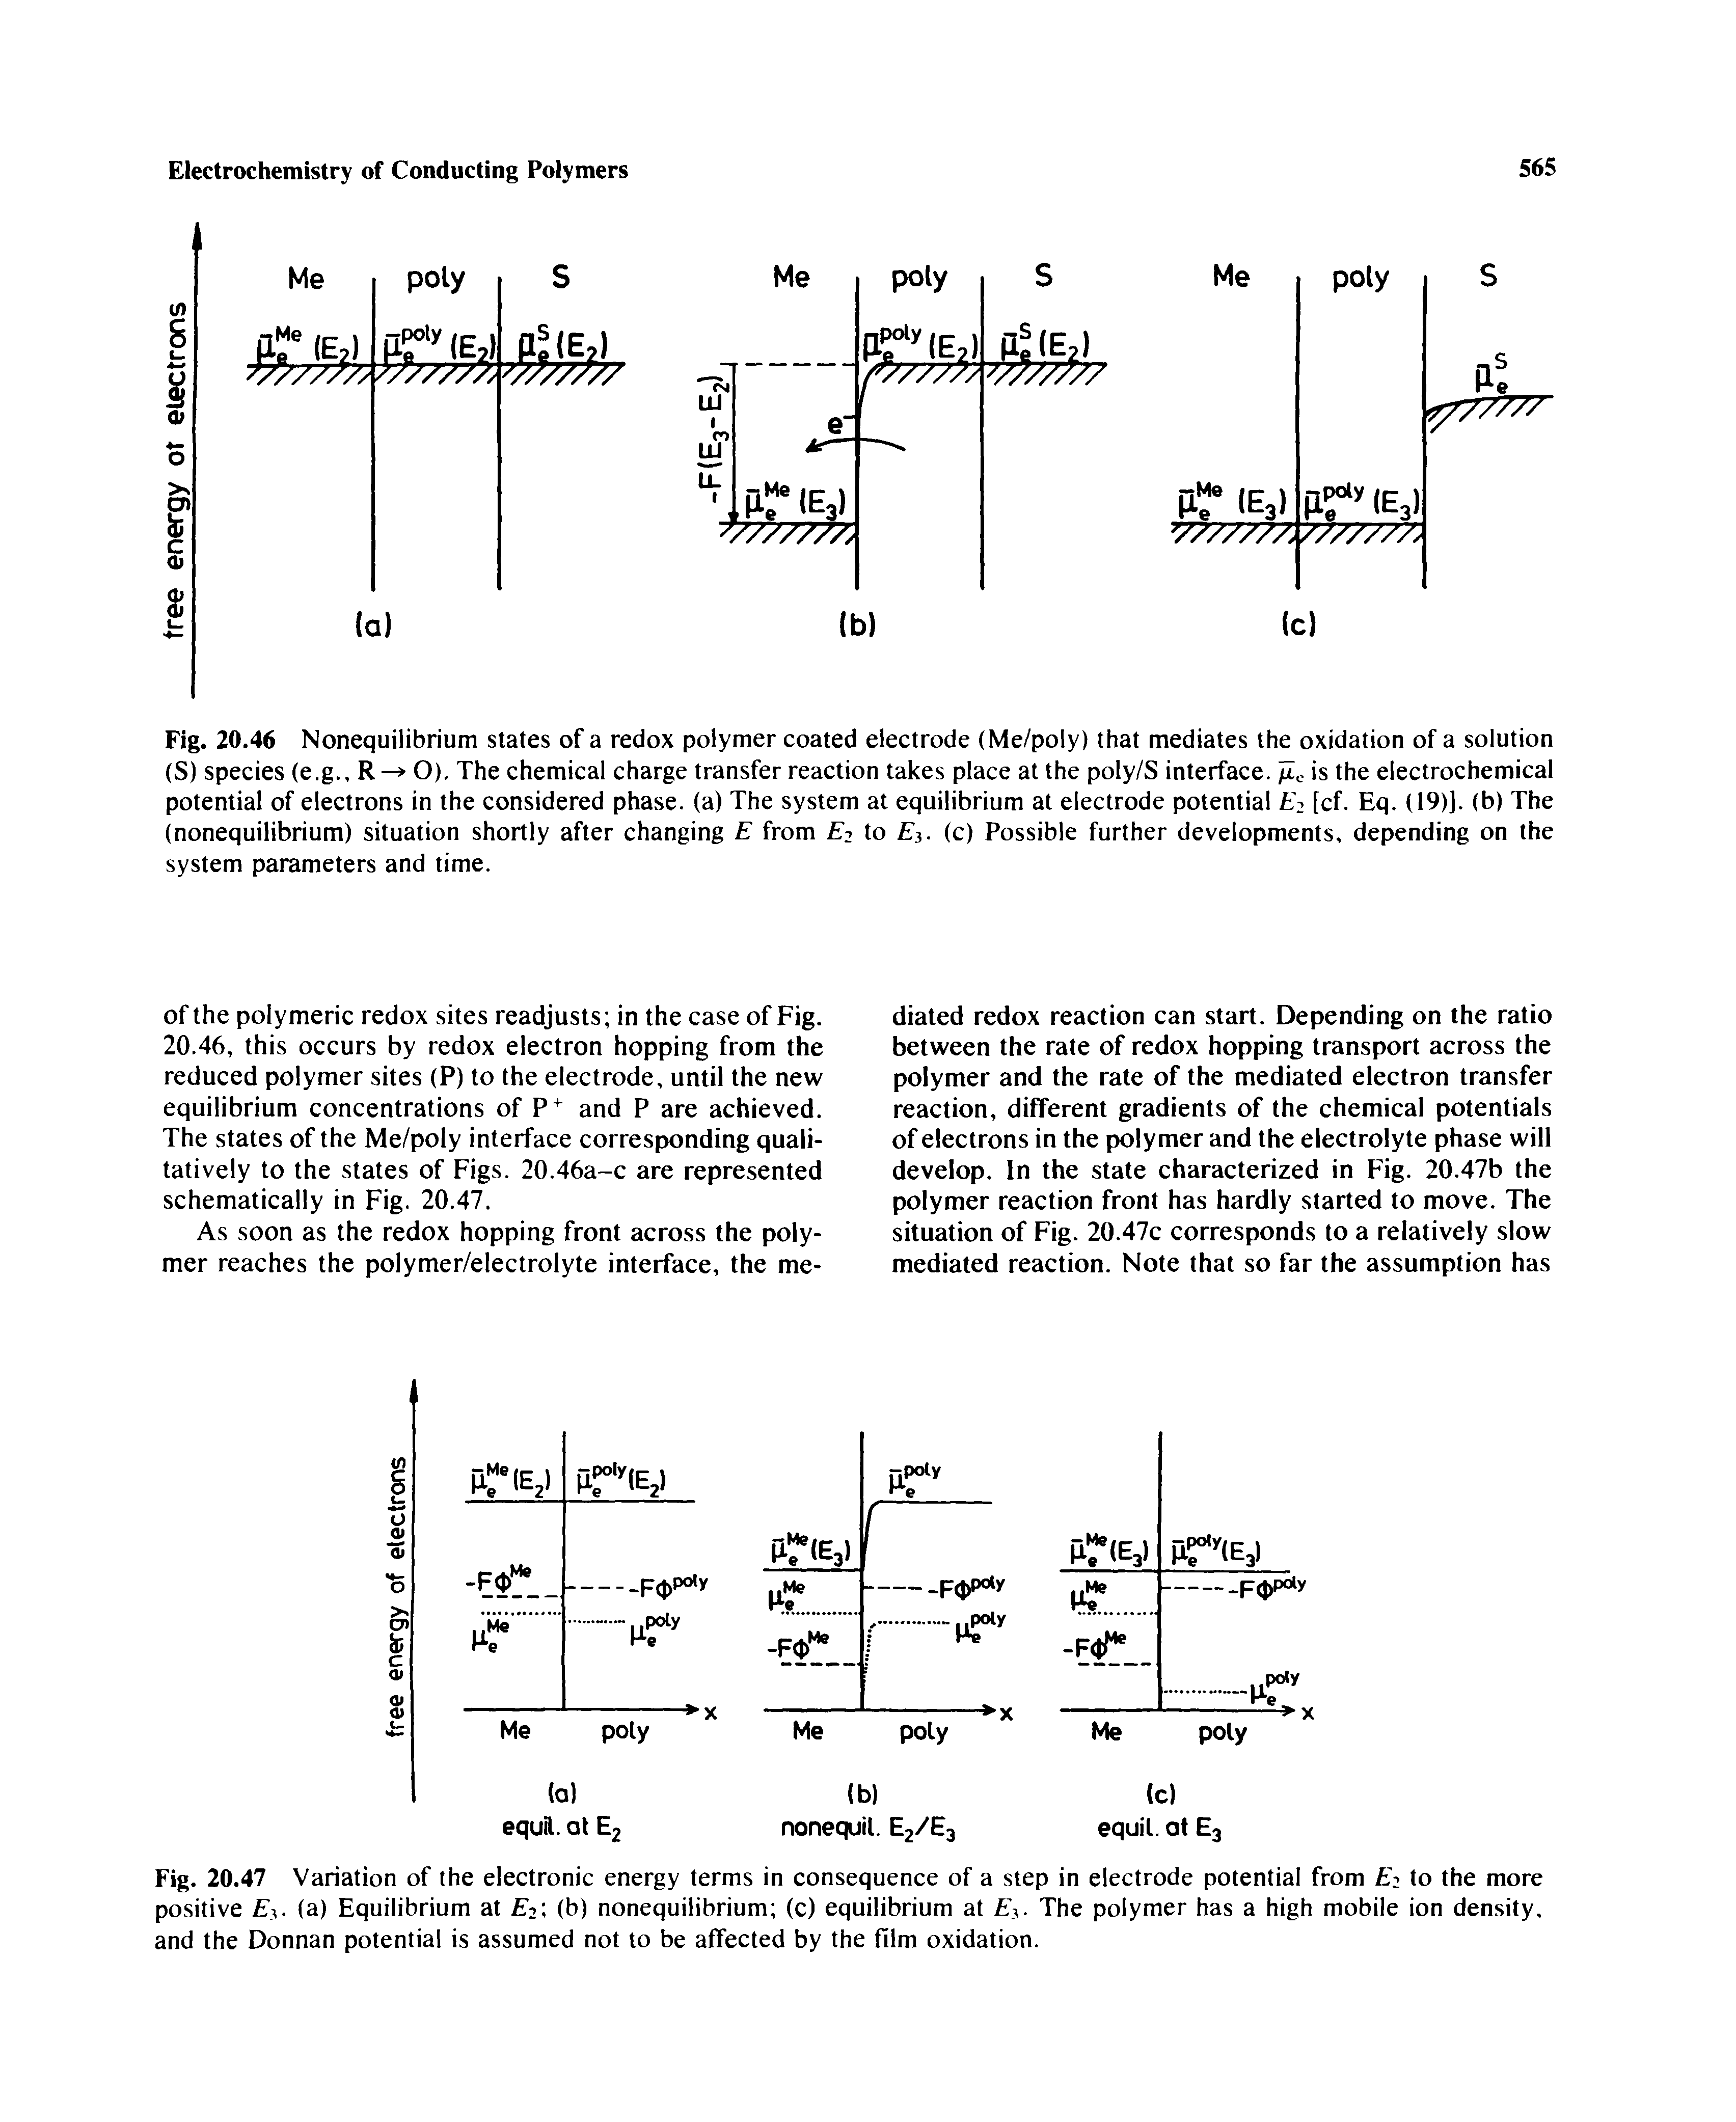 Fig. 20.46 Nonequilibrium states of a redox polymer coated electrode (Me/poly) that mediates the oxidation of a solution (S) species (e.g., R— O), The chemical charge transfer reaction takes place at the poly/S interface. ]Lc is the electrochemical potential of electrons in the considered phase, (a) The system at equilibrium at electrode potential 2 [cf. Eq. (19)]. (b) The (nonequilibrium) situation shortly after changing from 2 to 3. (c) Possible further developments, depending on the system parameters and time.